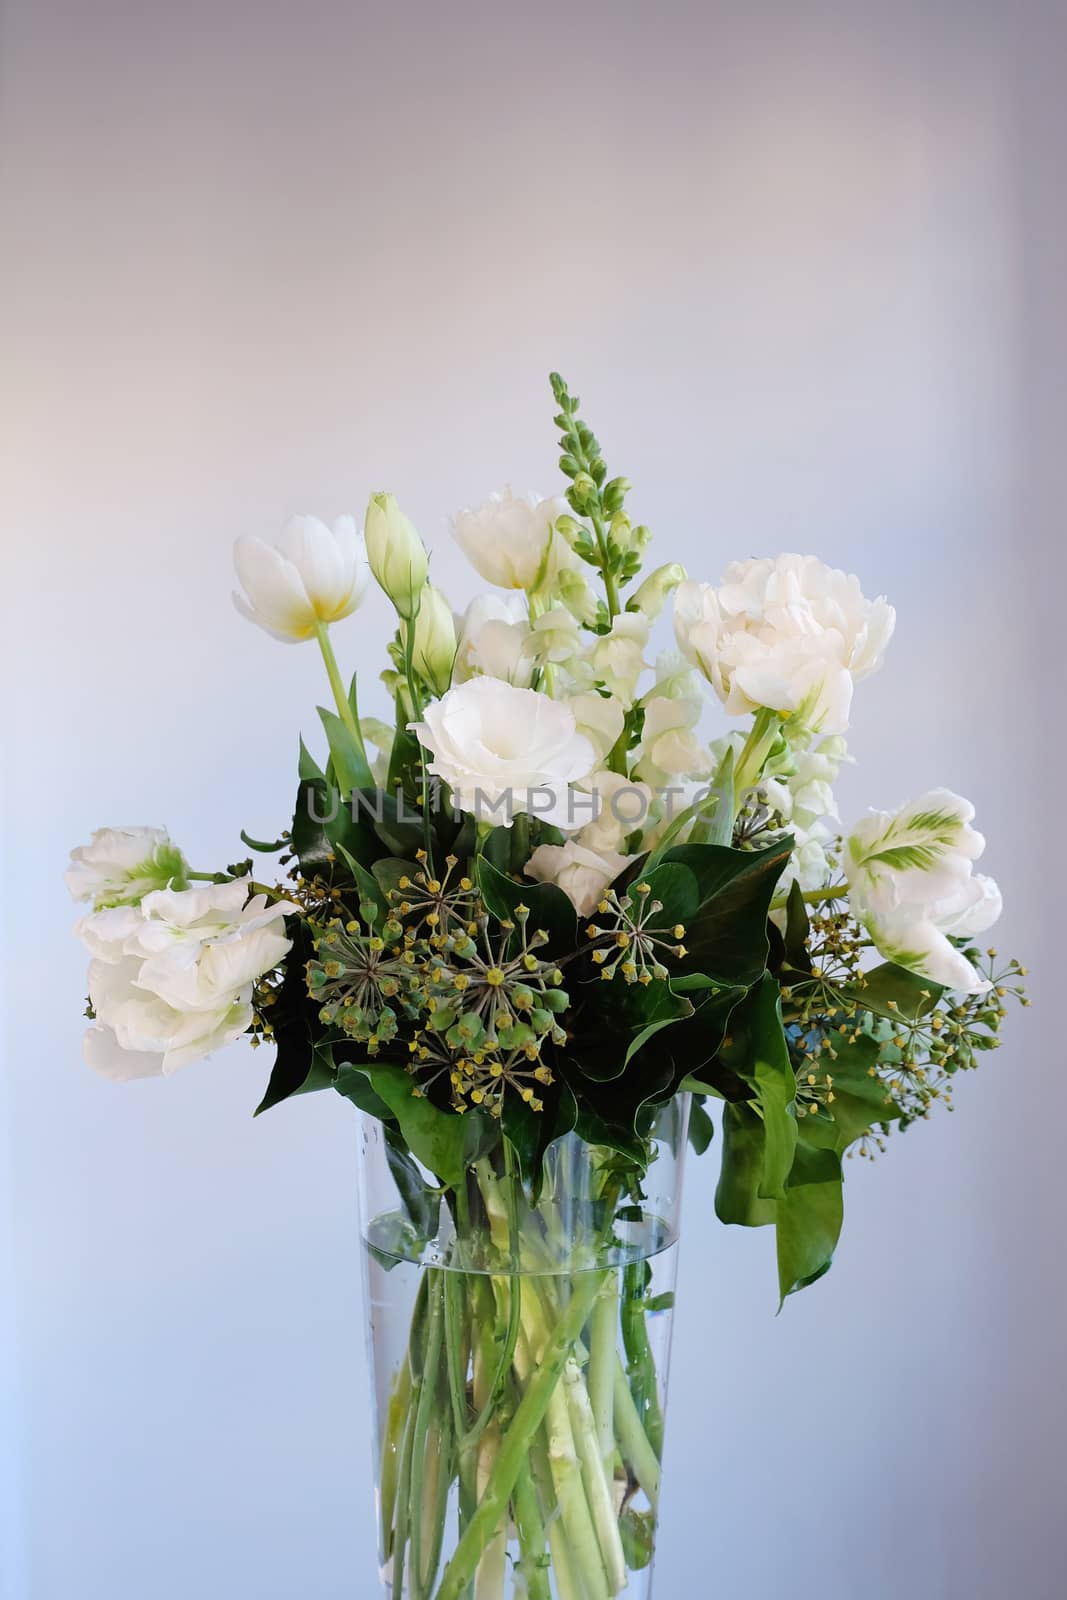 Bouquet of white and green flowers in a glass vase